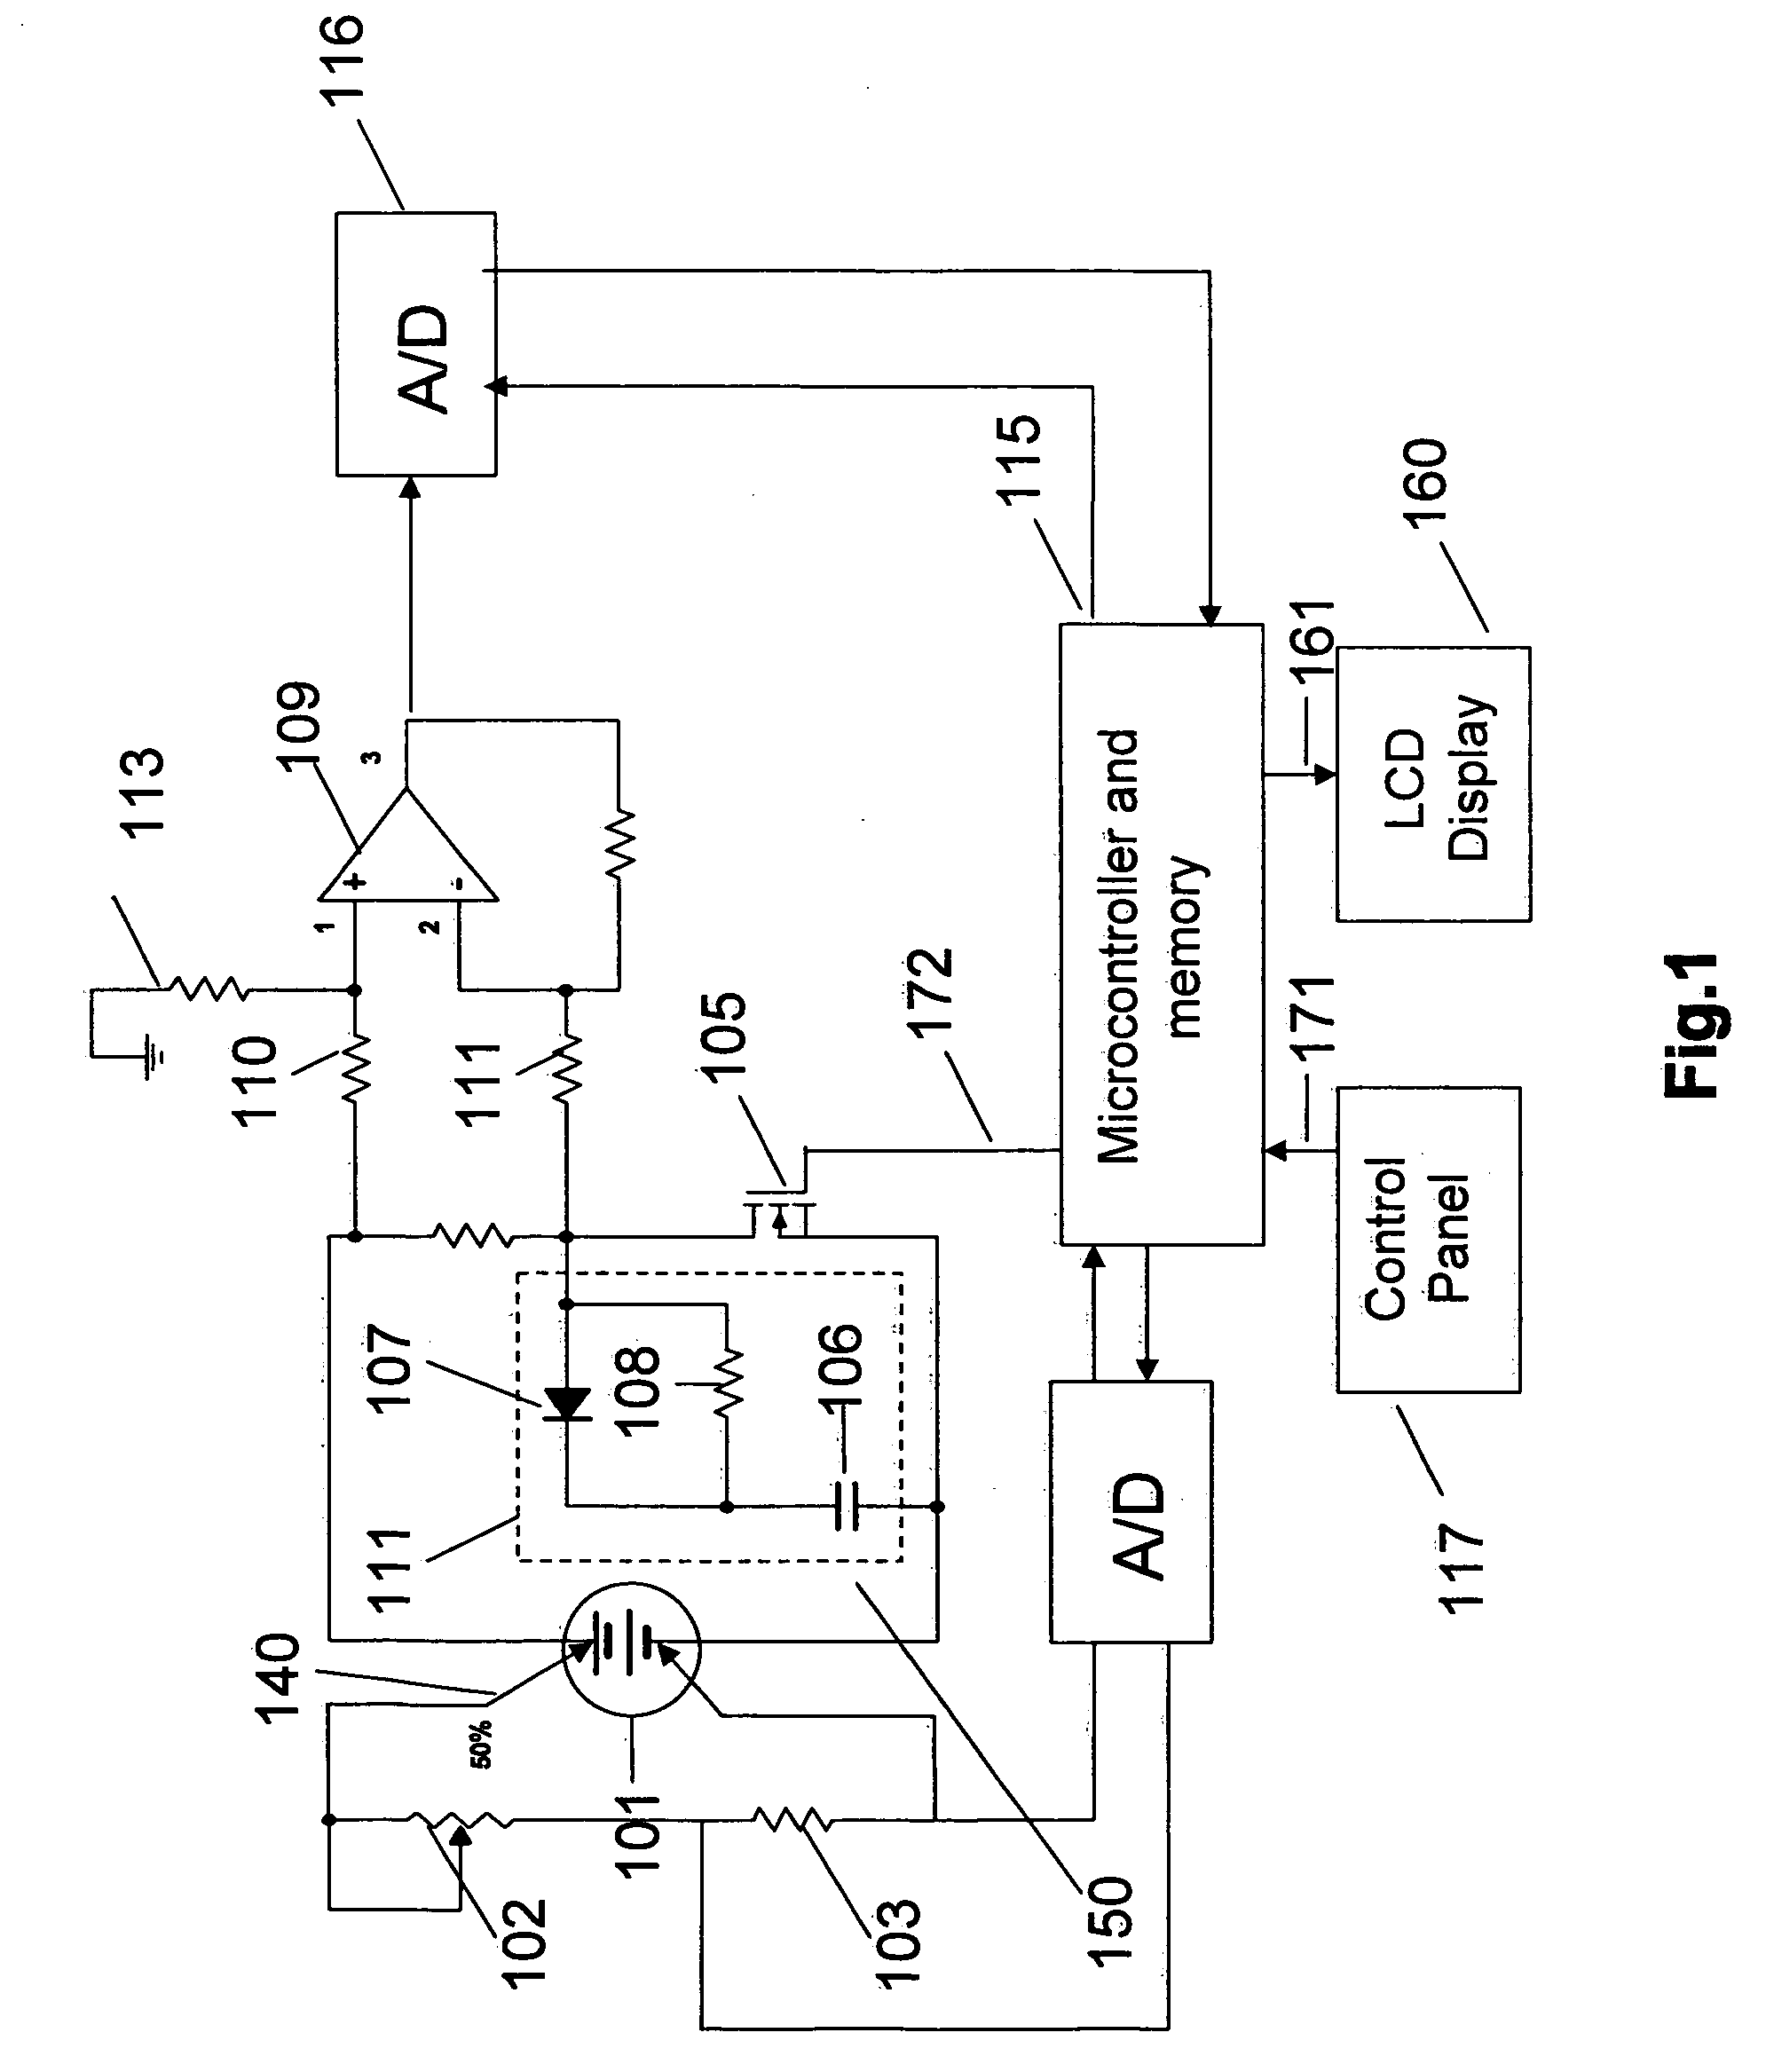 [method and apparatus for battery testing and measuring]